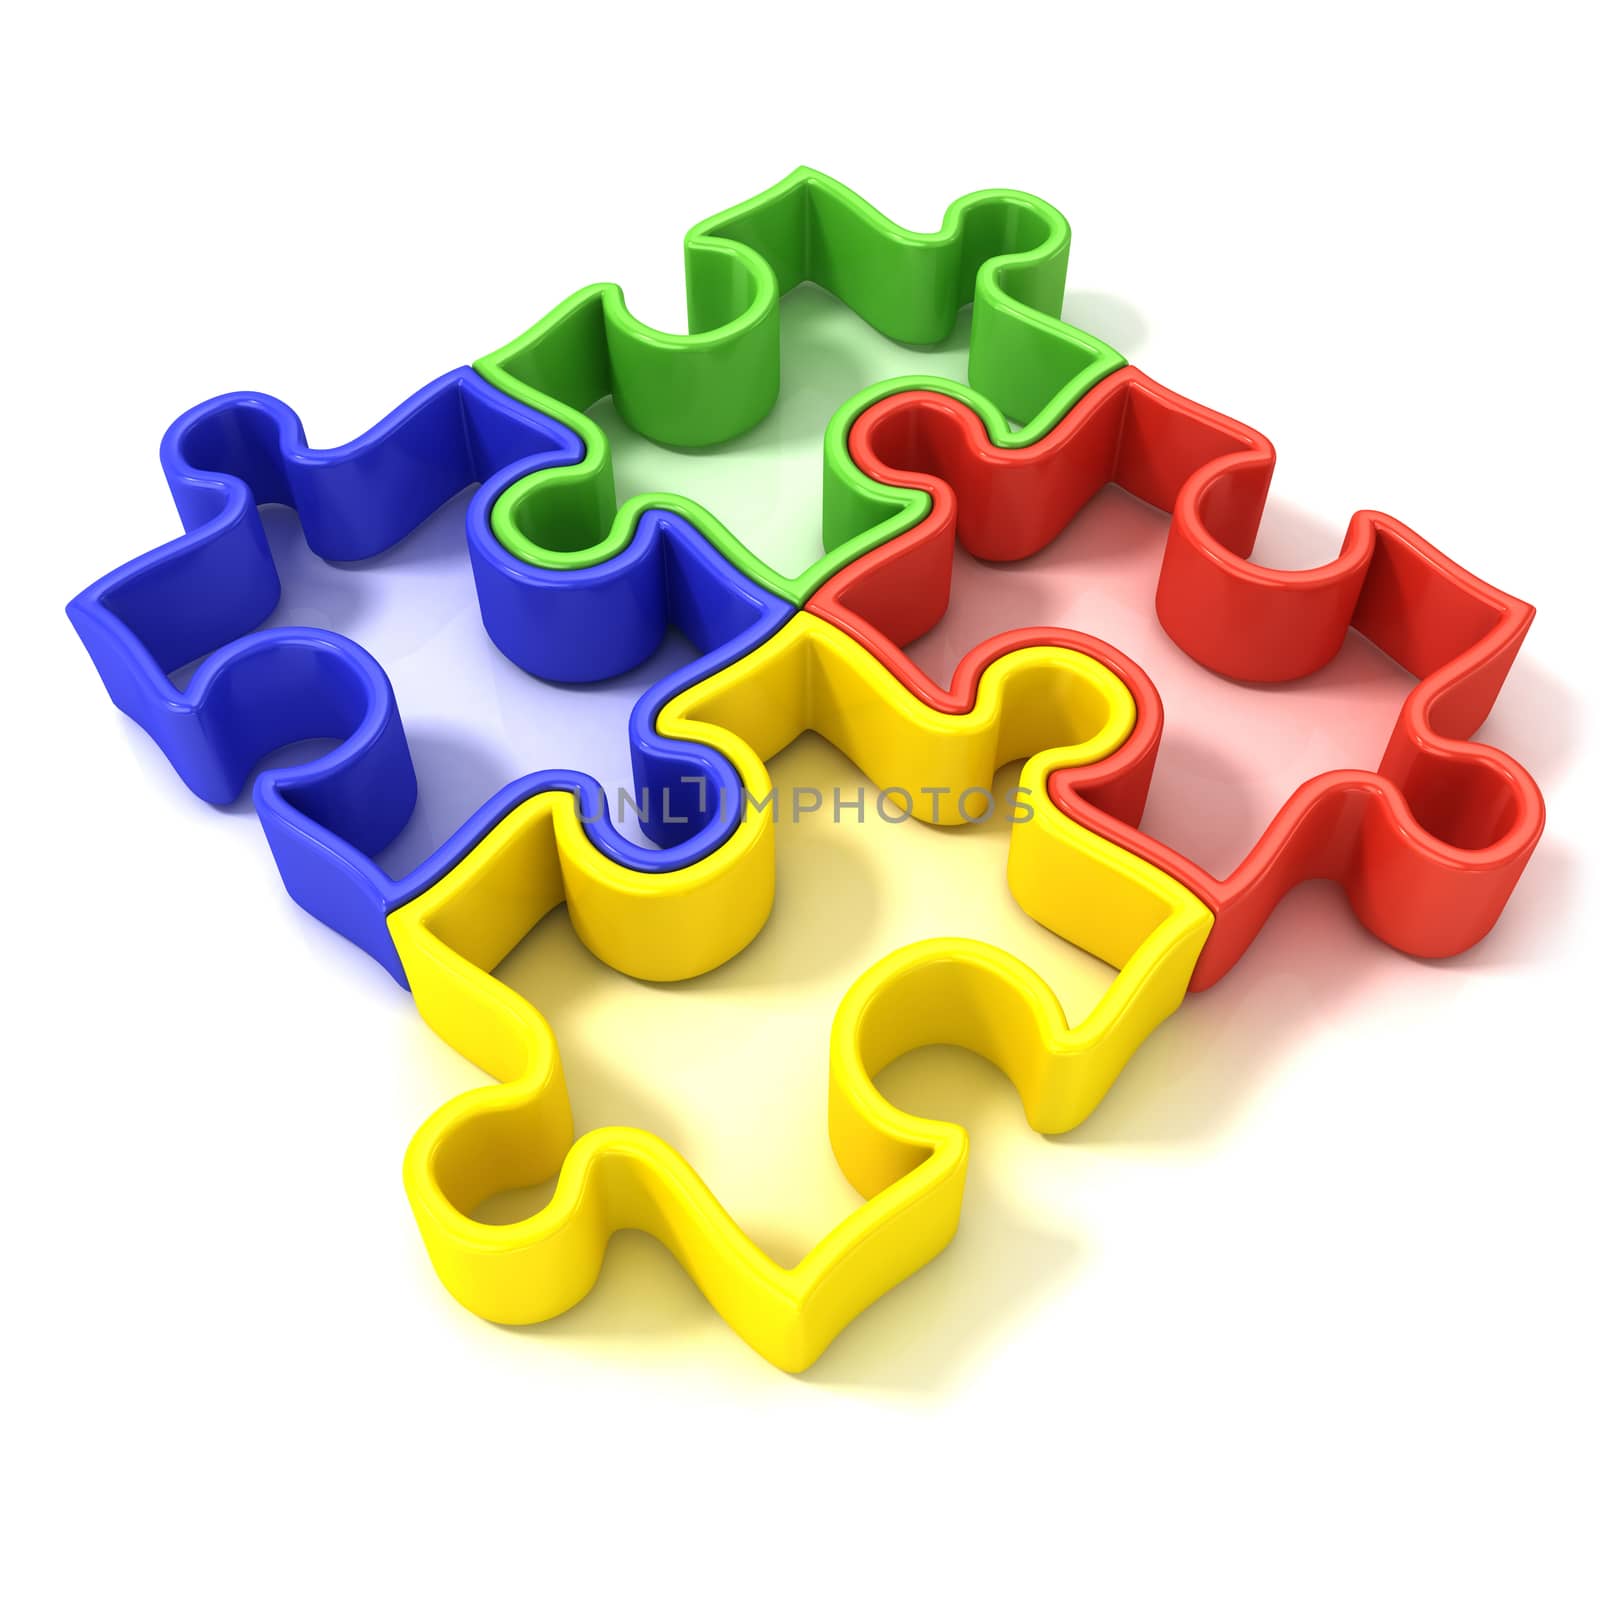 Four colorful outlined jigsaw puzzle pieces, banded by djmilic